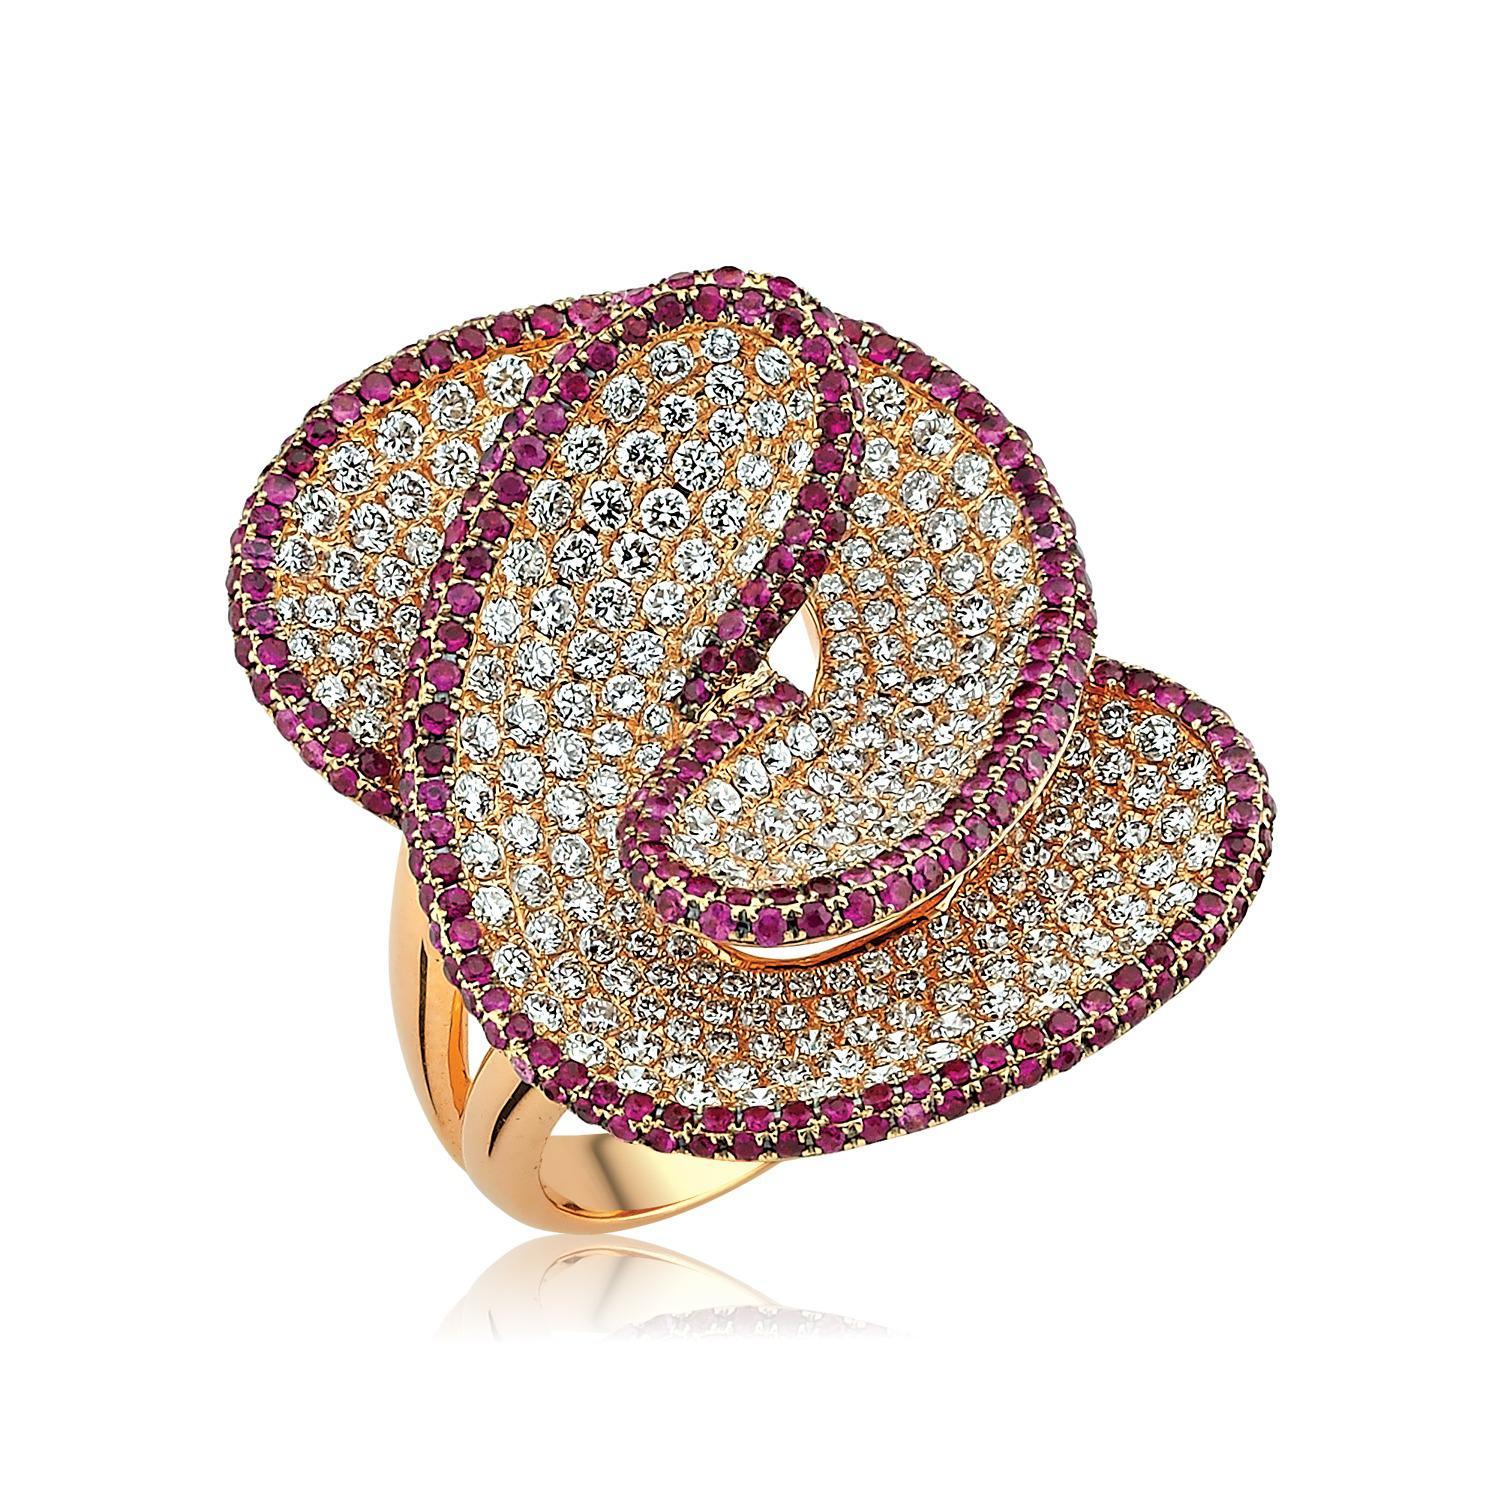 For Sale:  Connected 18k Gold Ring with White Diamonds and Rubies 4